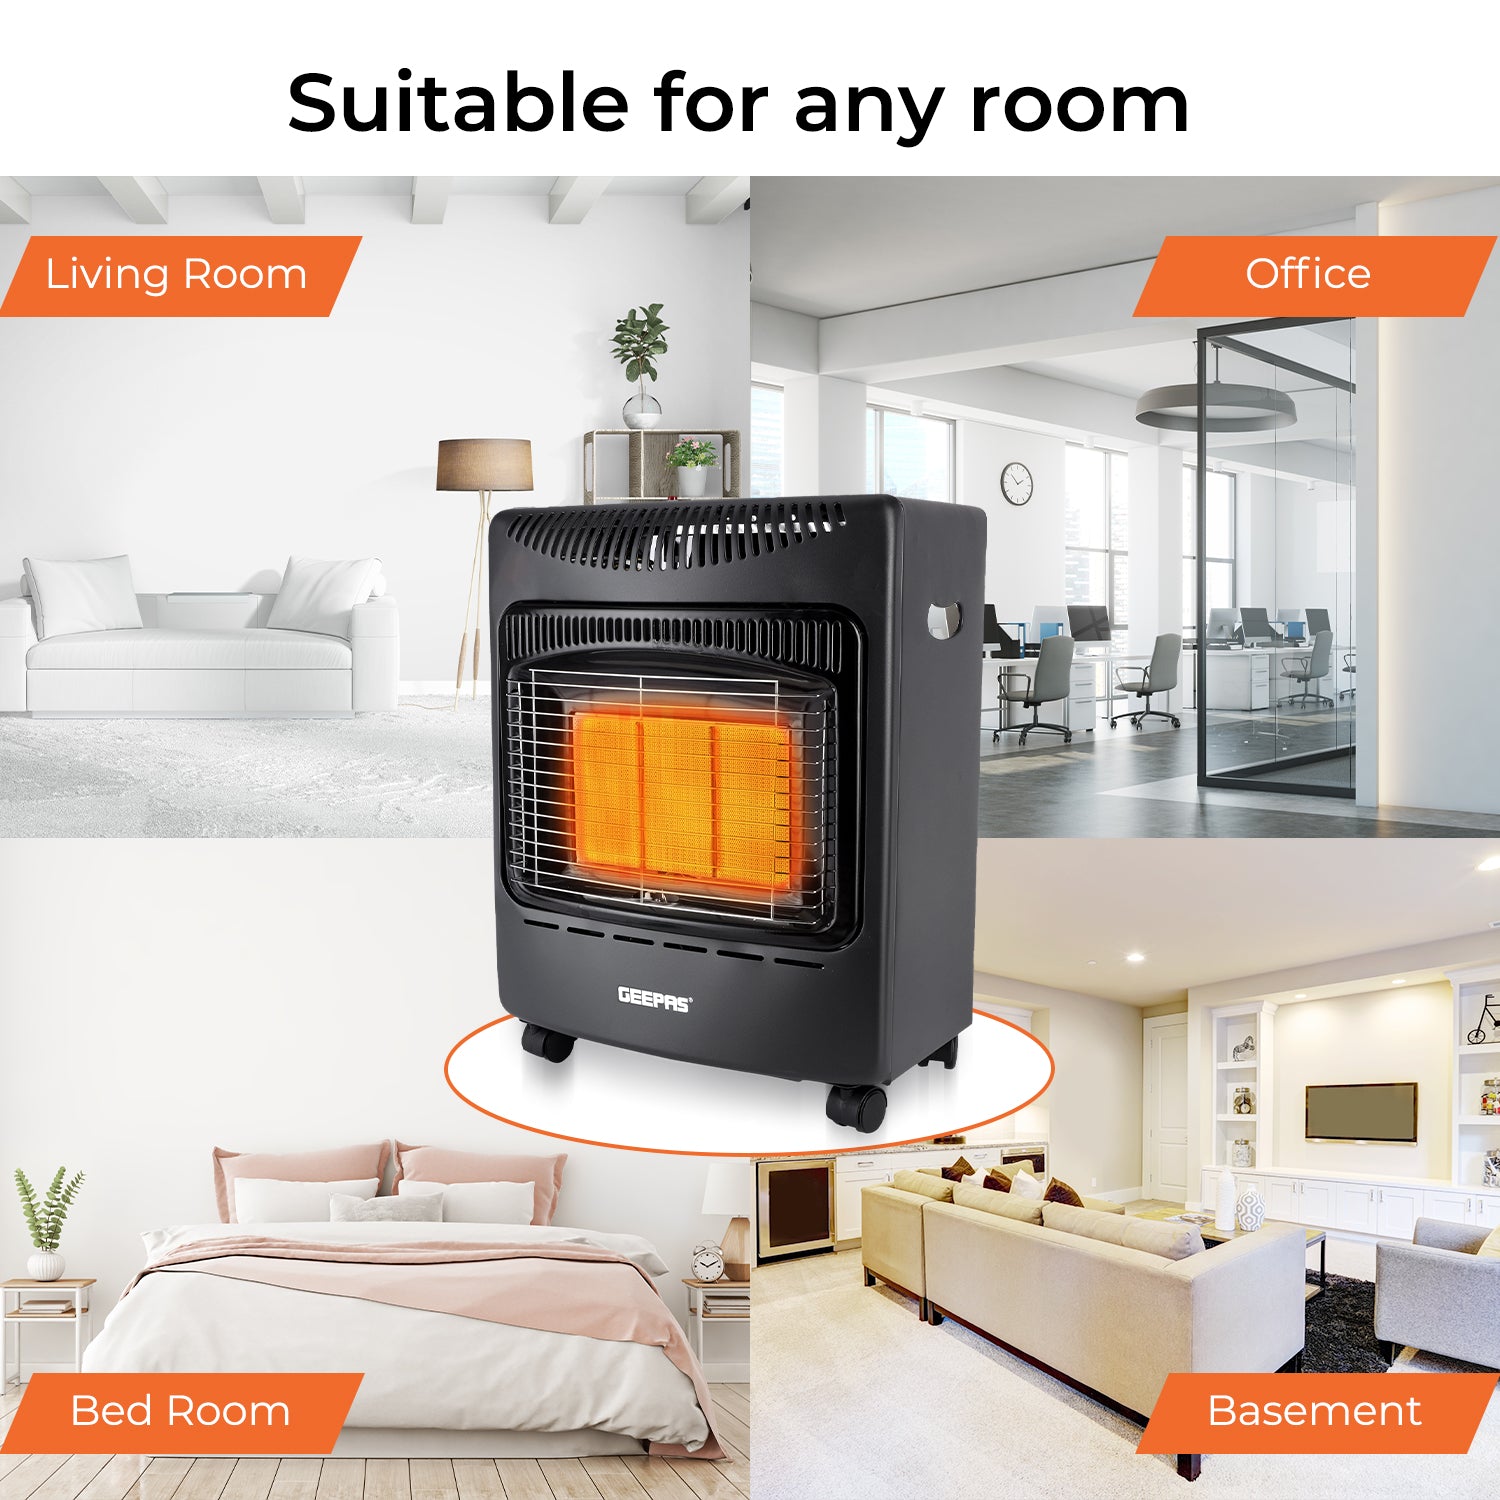 4.2KW Portable Indoor Gas Heater with Piezoelectric Ignition